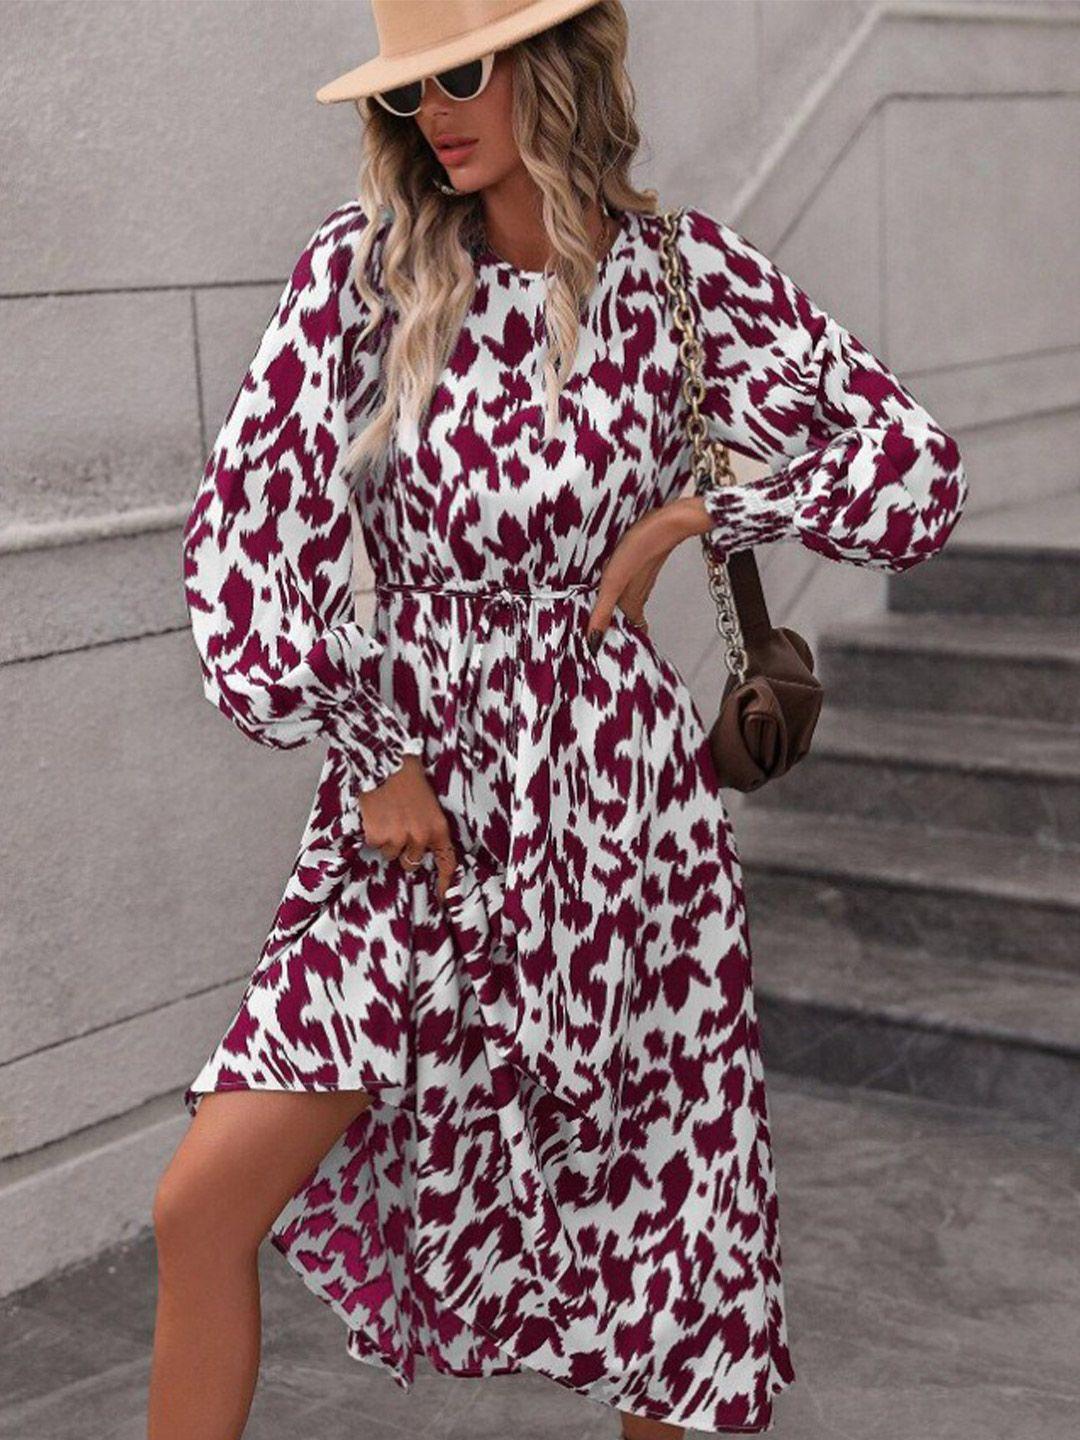 stylecast-floral-printed-round-neck-long-sleeves-dress